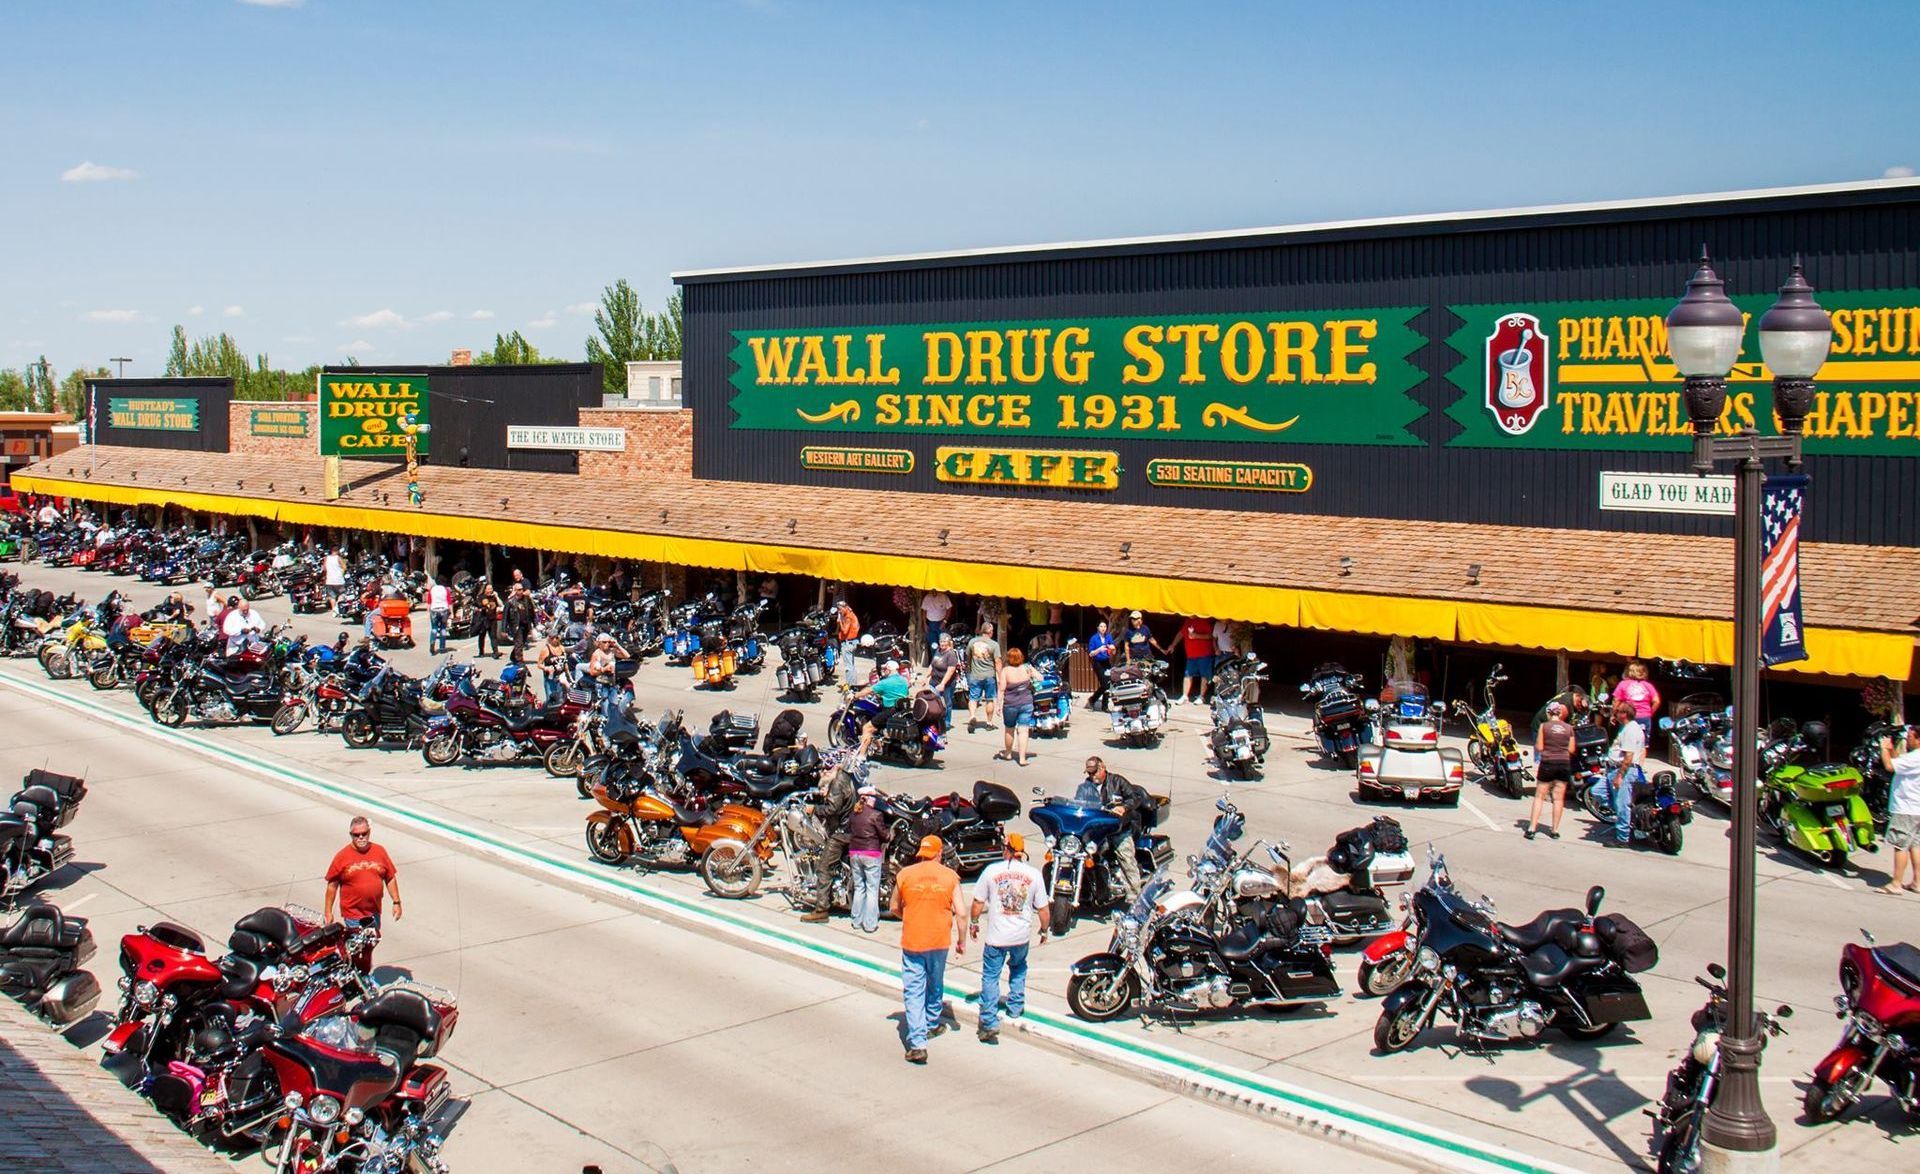 
World's Largest Drug Store, world record in Wall, South Dakota